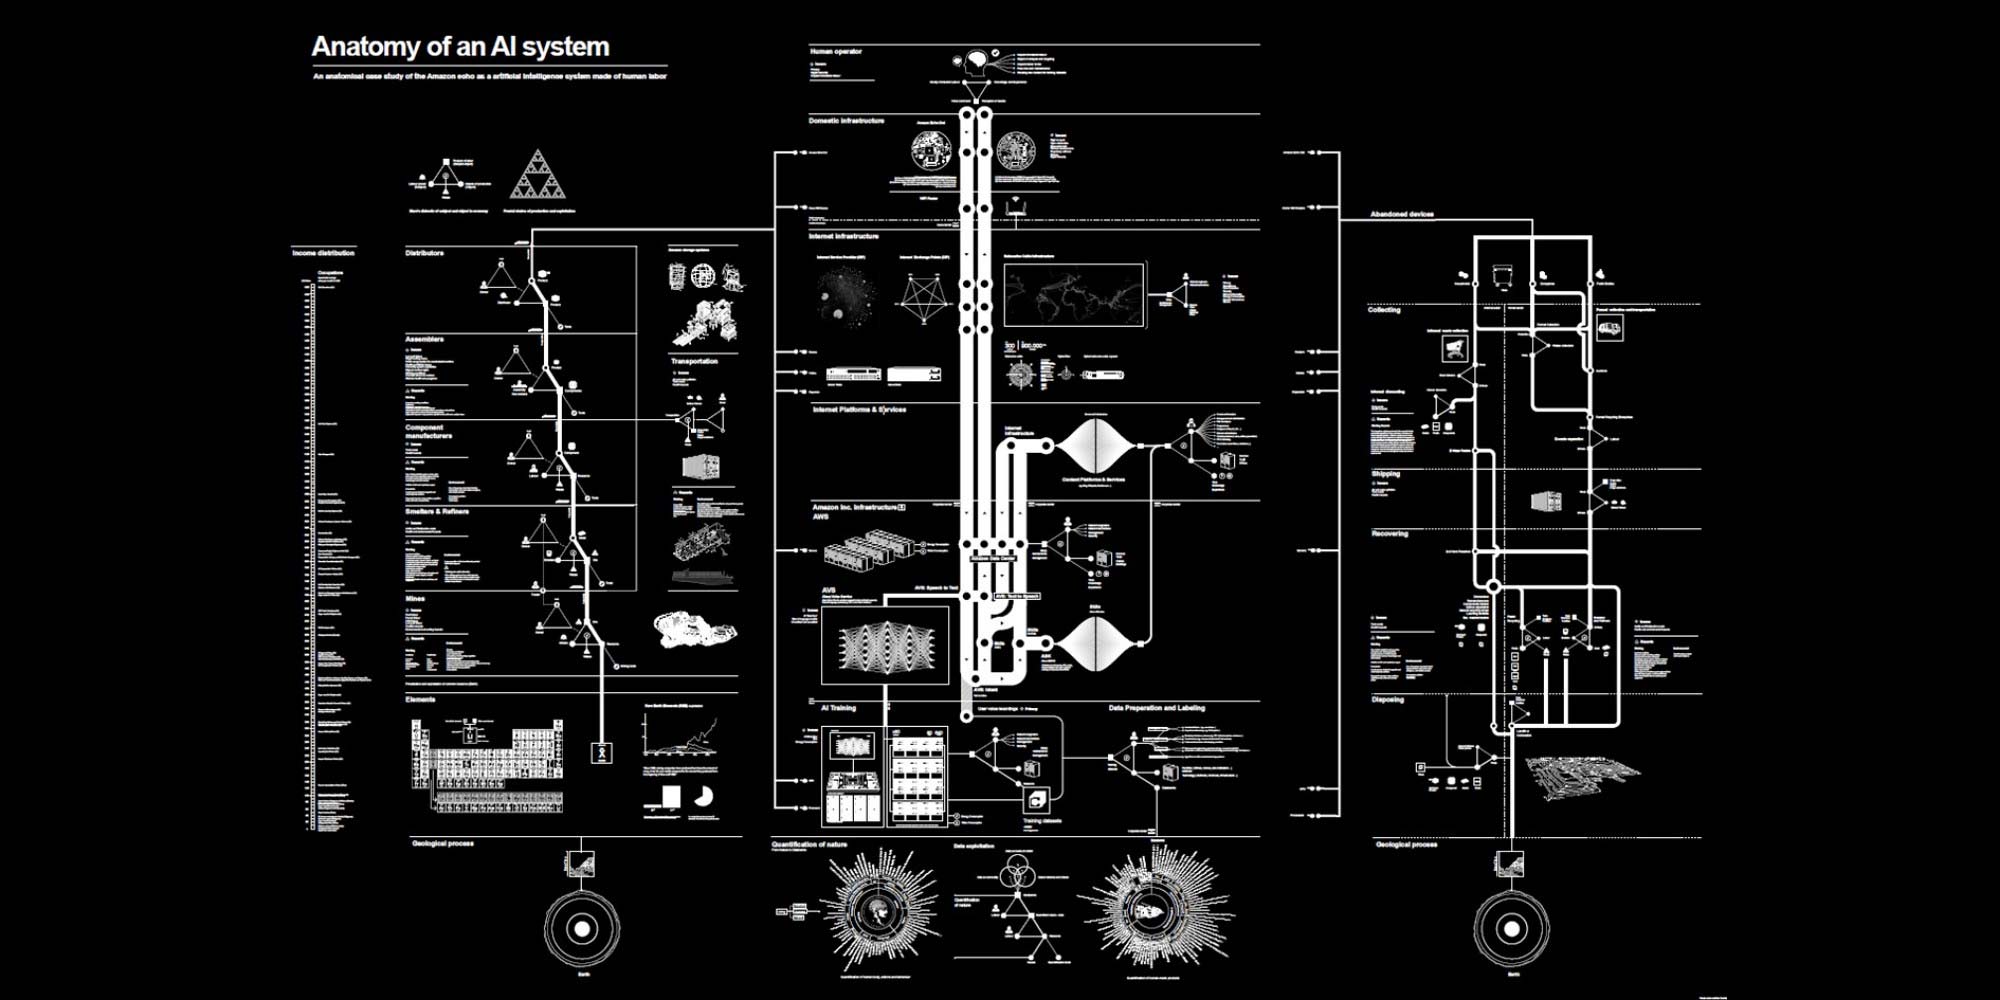 Anatomy of an AI System  / Kate Crawford (US), AI Now Institute and Vladan Joler (RS) / SHARE Lab